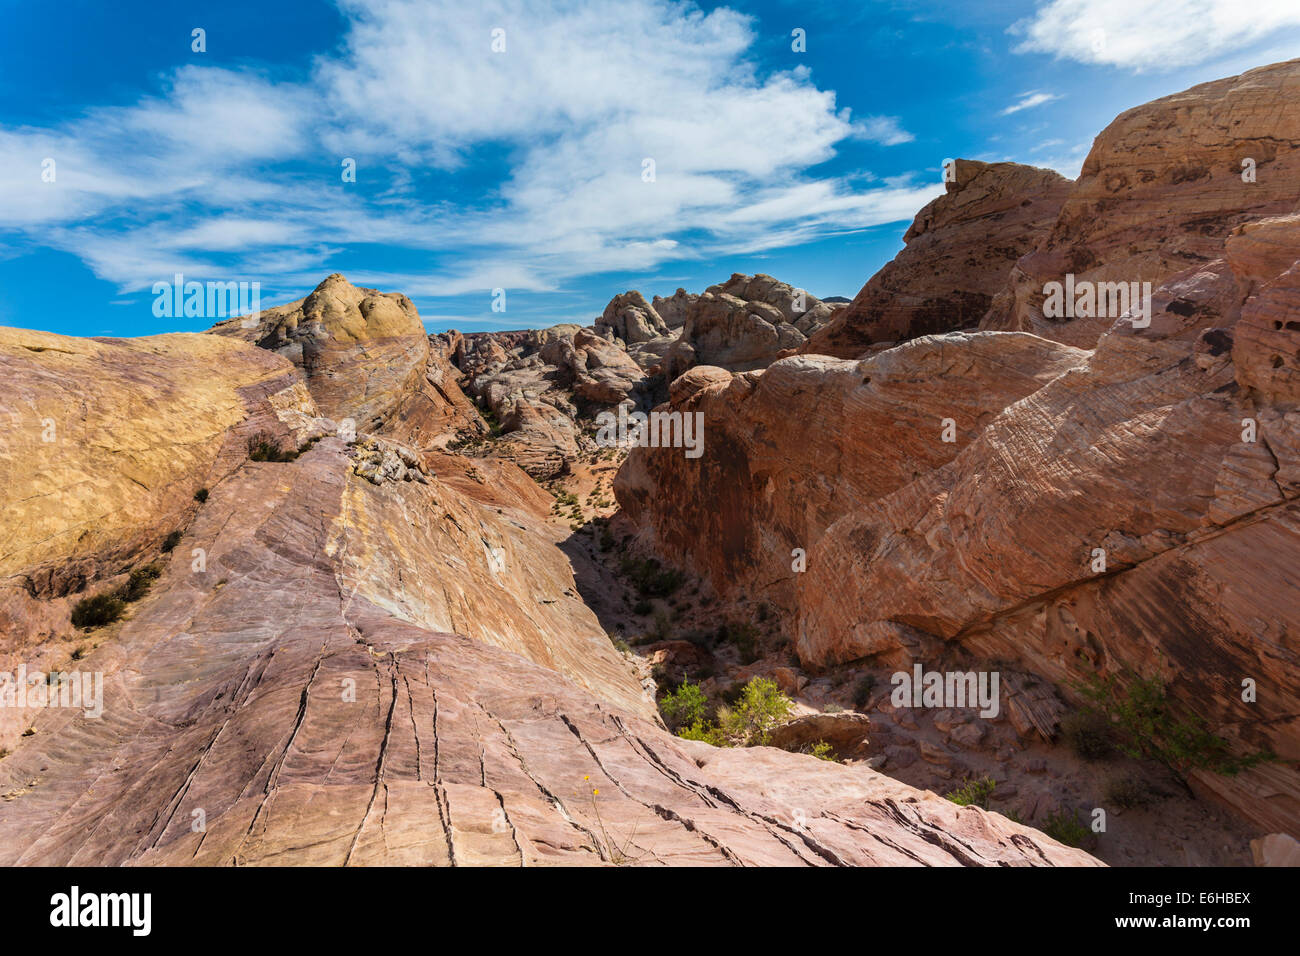 Rock formations and desert vegetation in Valley of Fire State Park near Overton, Nevada Stock Photo